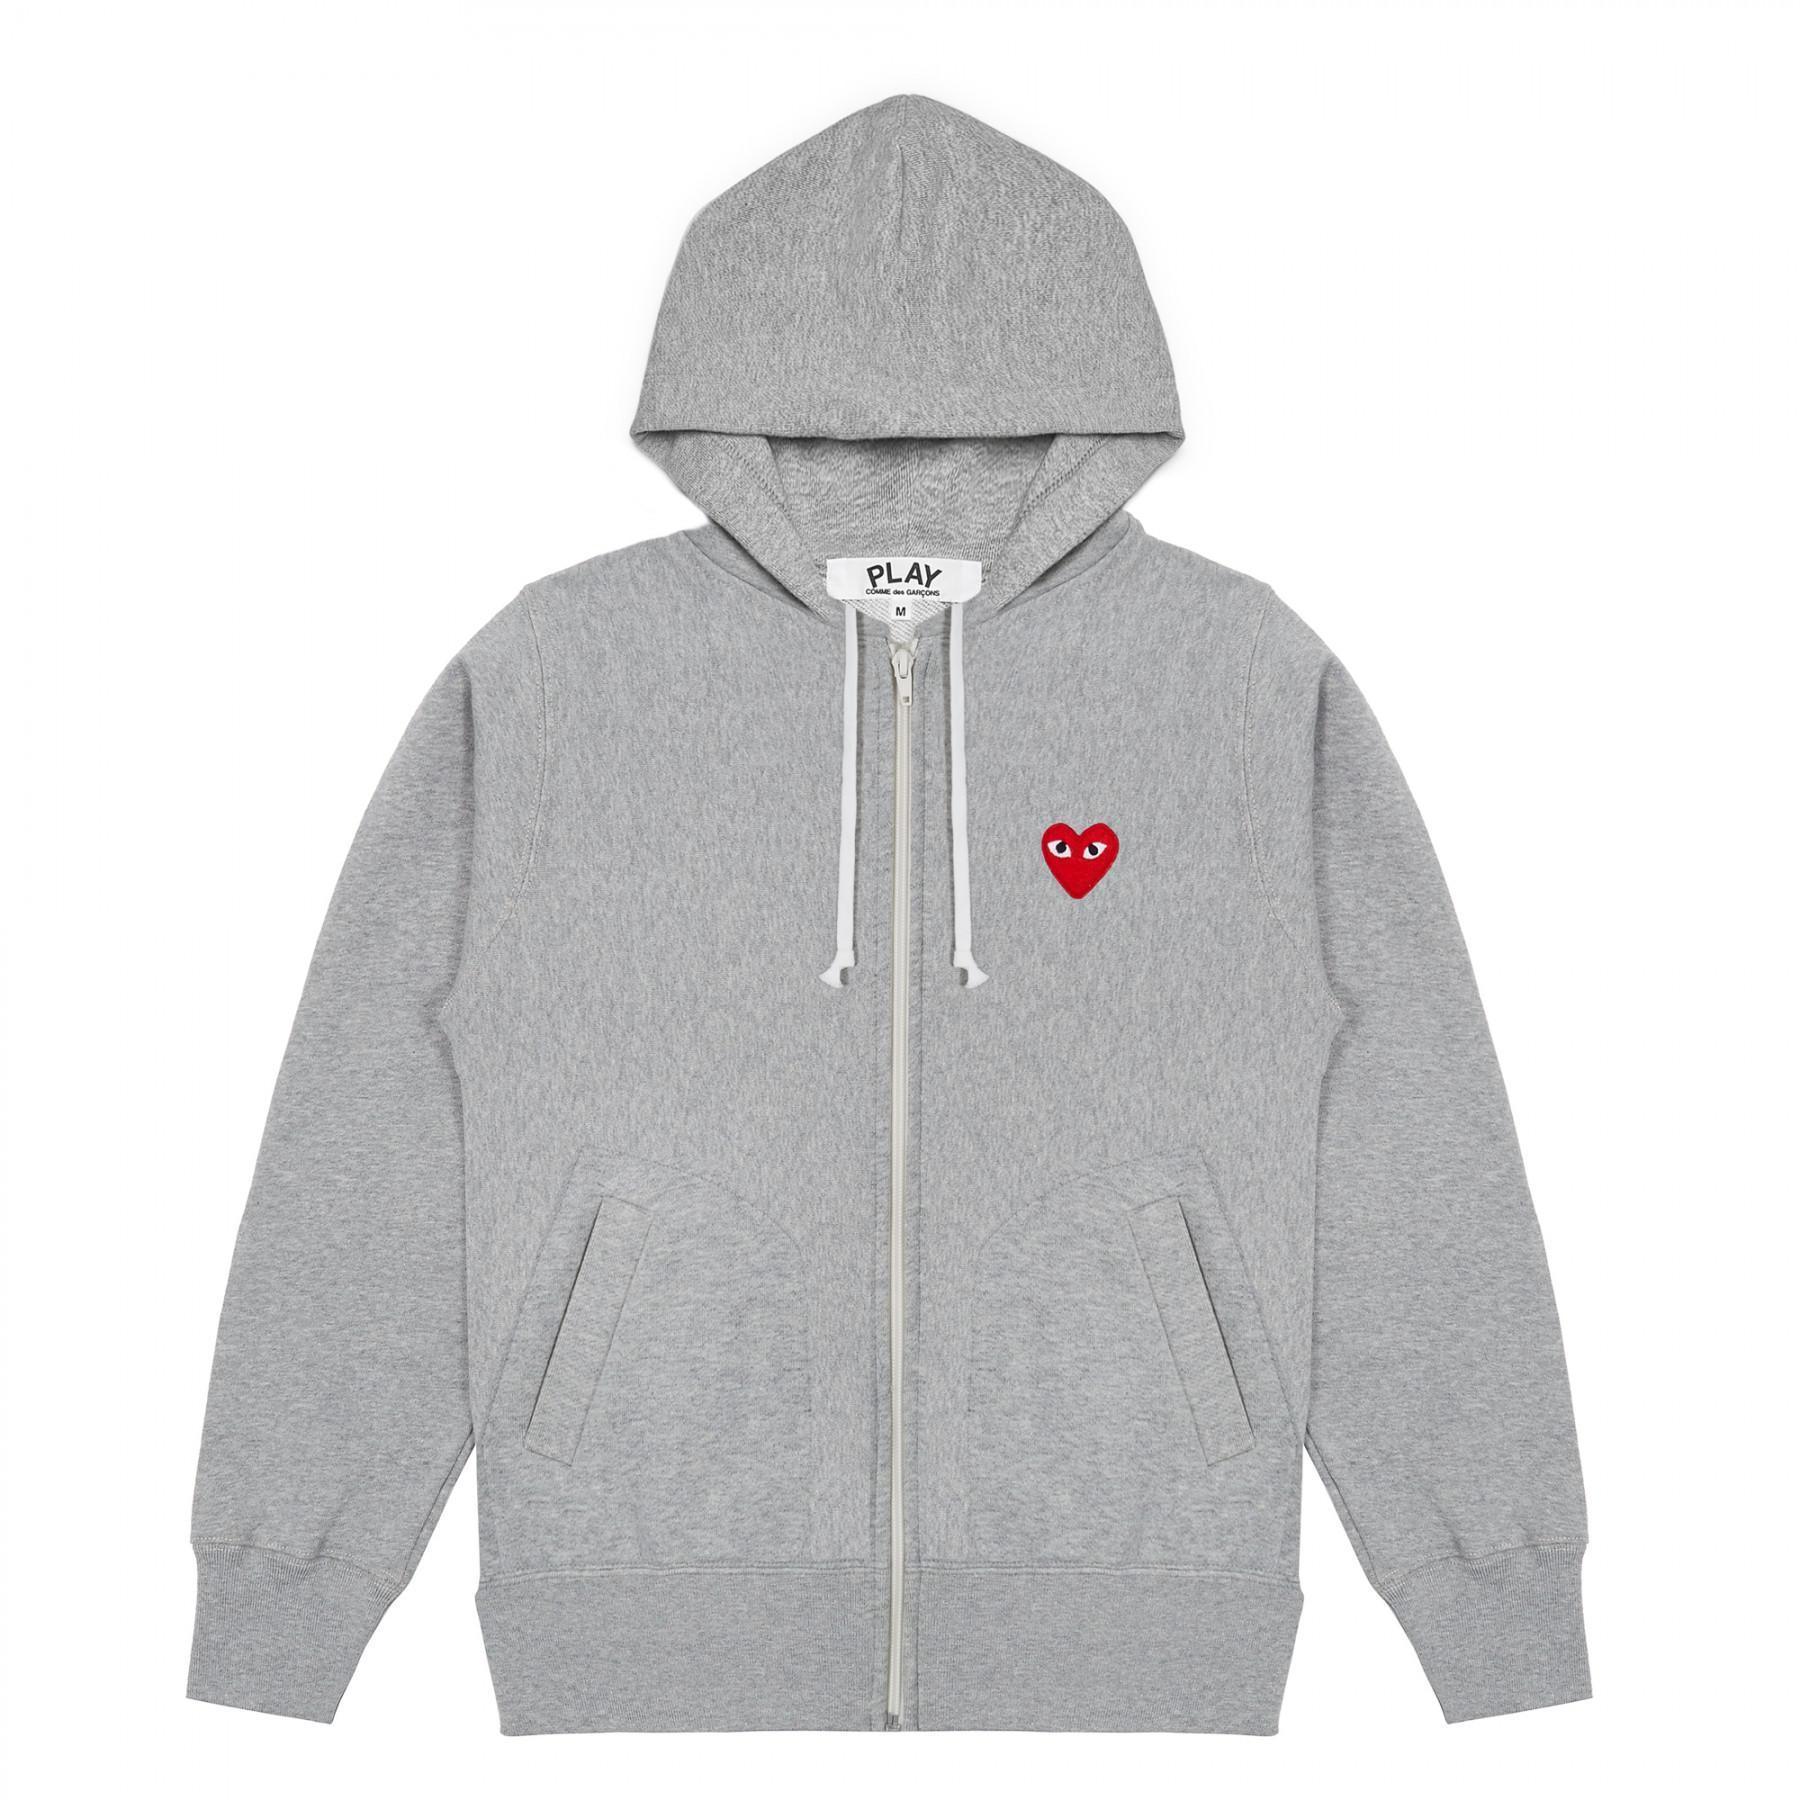 COMME DES GARCONS 5 HEARTS ZIP UP - Gravity NYC